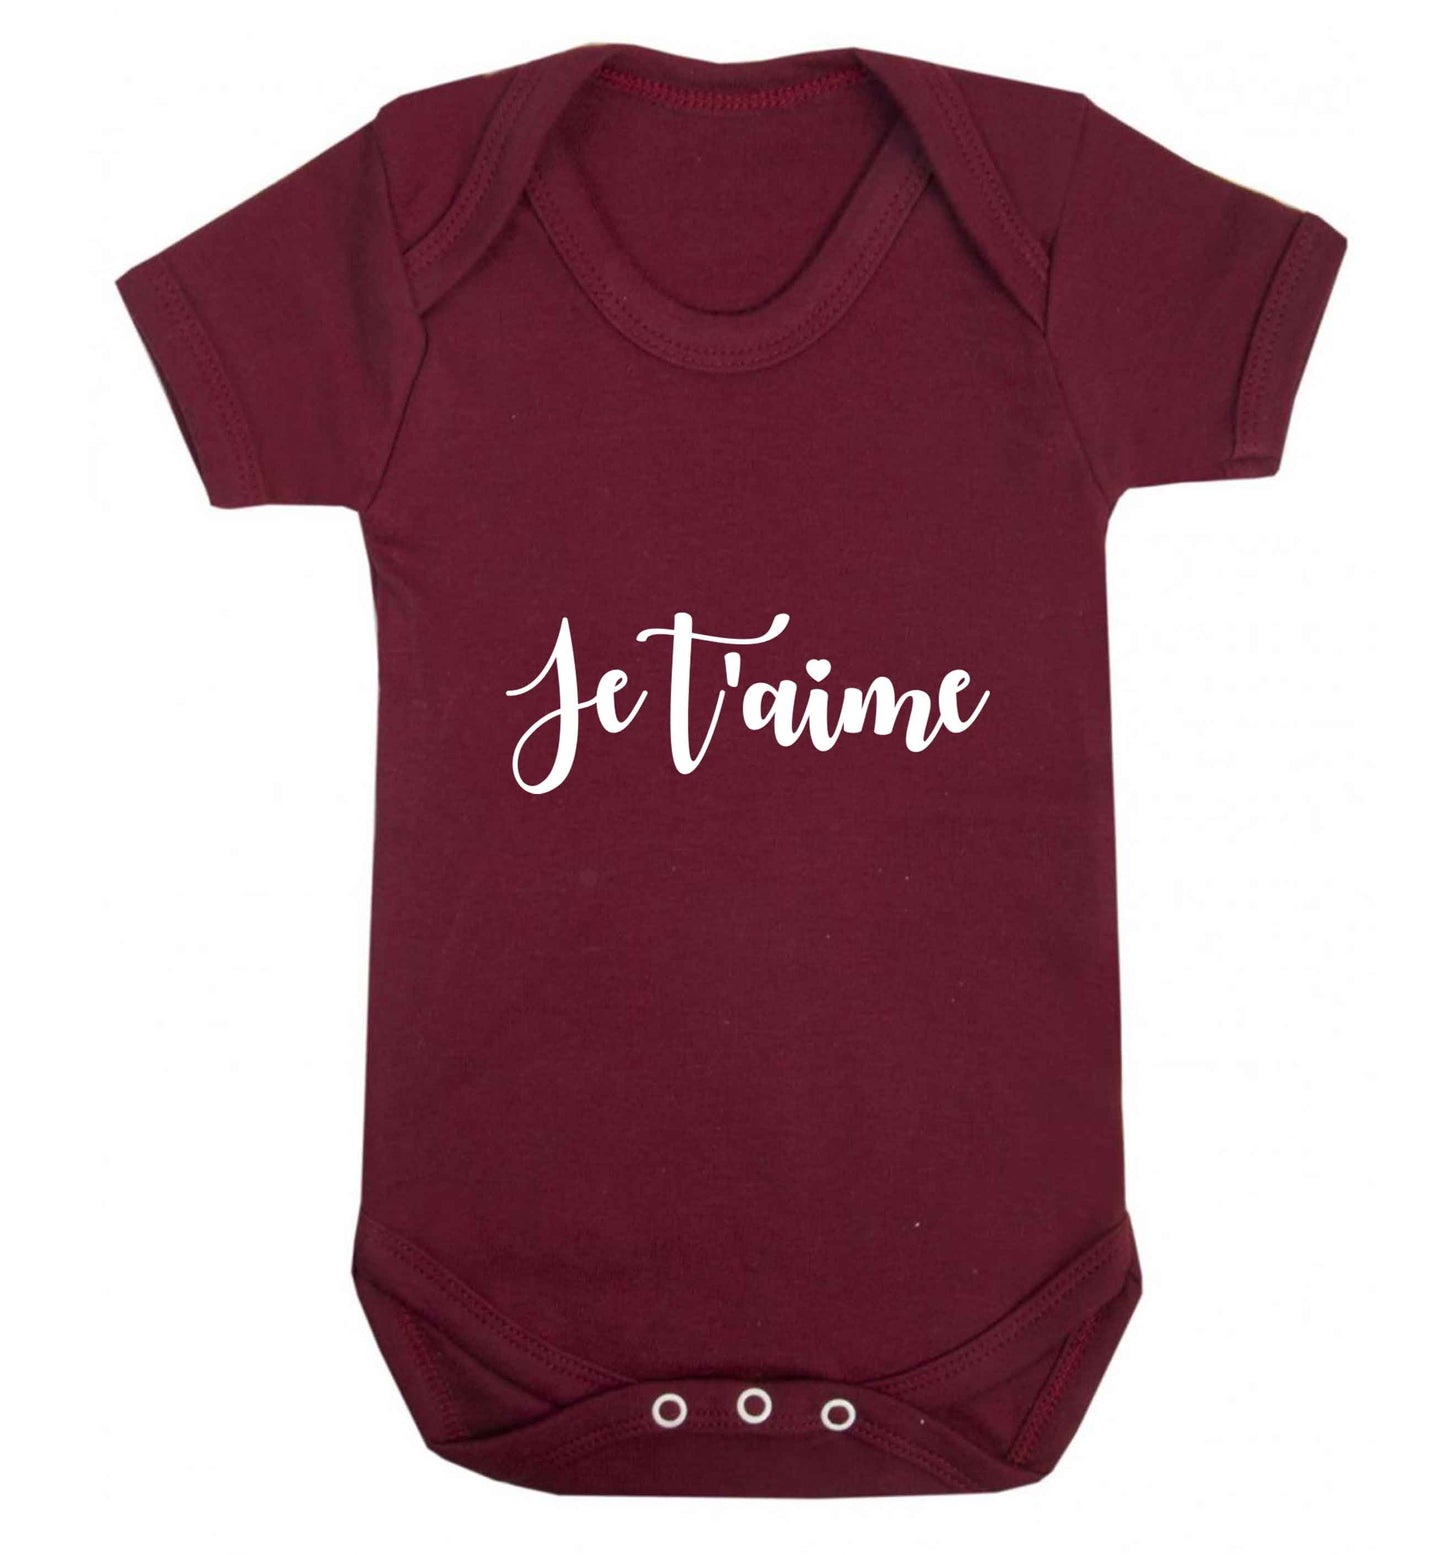 Je t'aime baby vest maroon 18-24 months